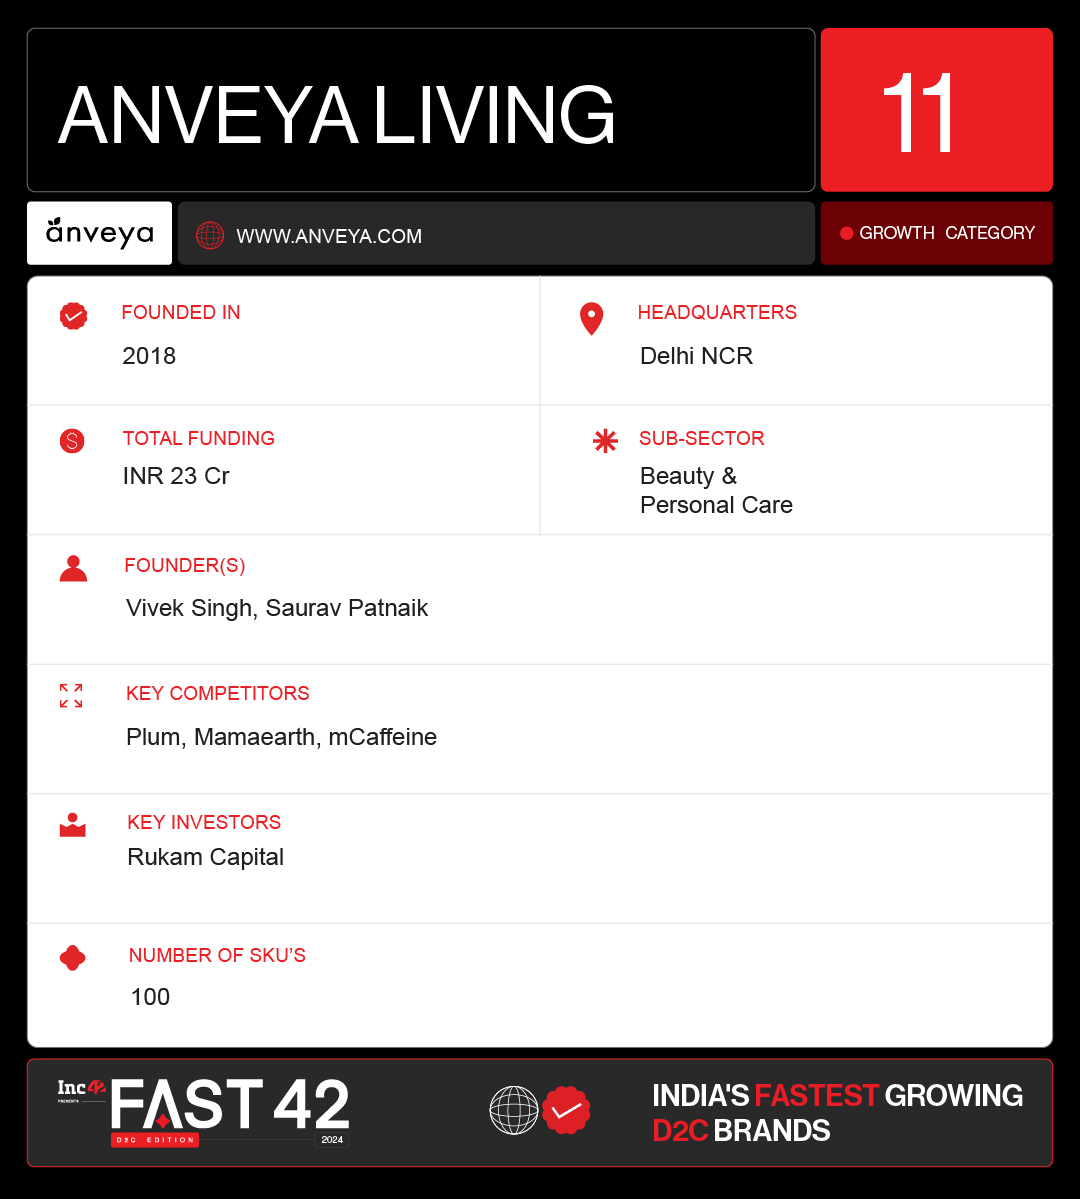 Anveya Living Is Making Waves With Beauty Fix For Curly Hair, Damage-Free Hair Colours